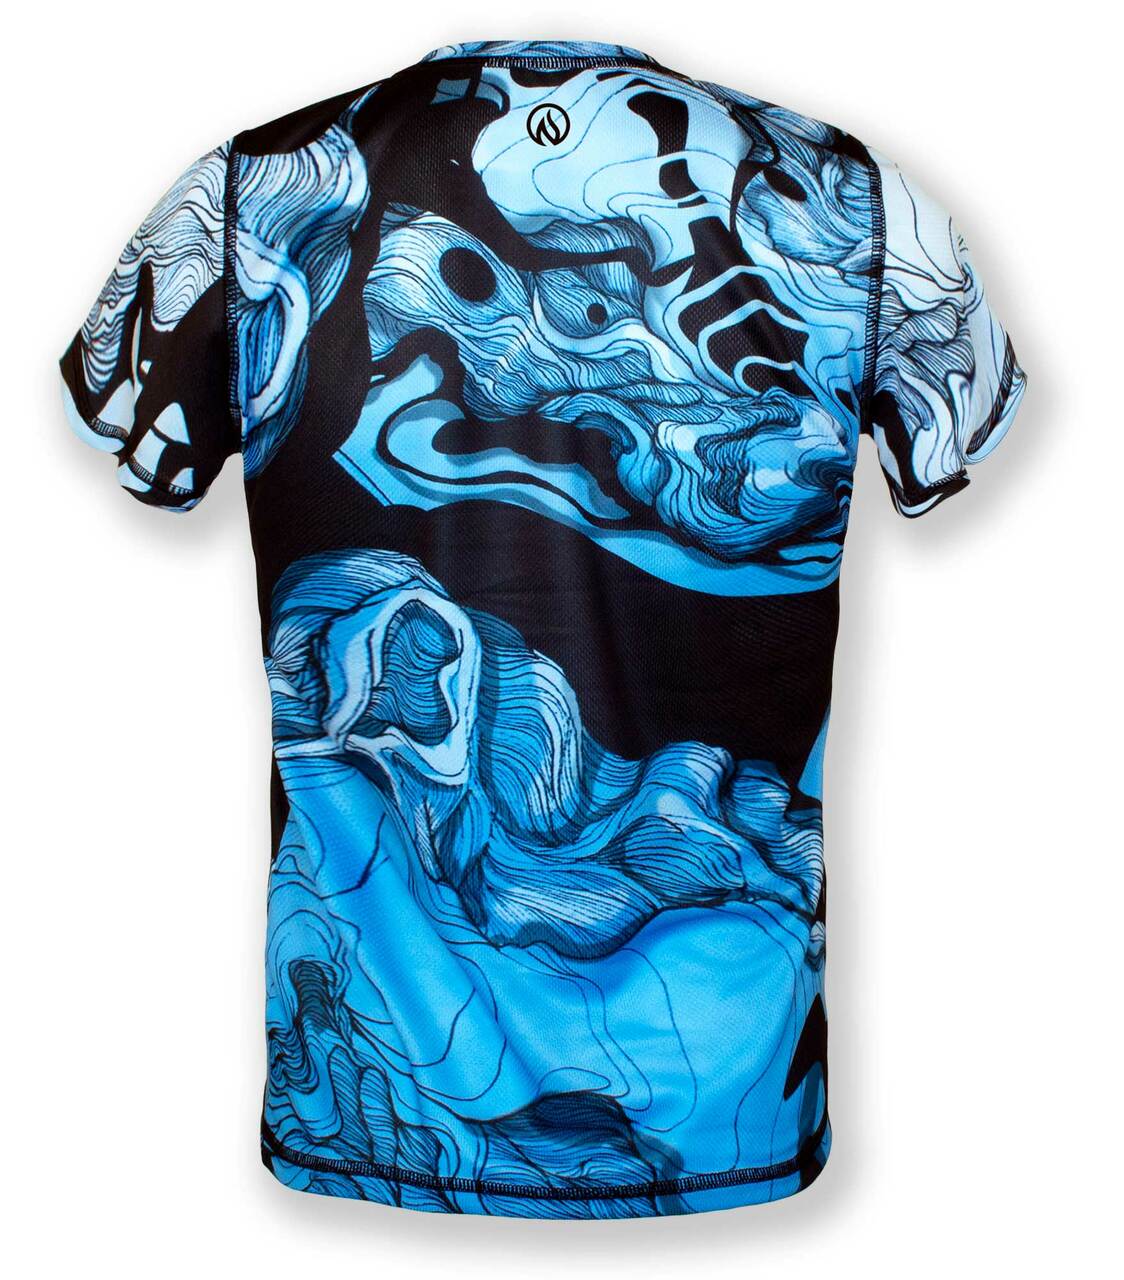 INKnBURN Men's Our Lady of the Mask Tech Shirt (S, L)